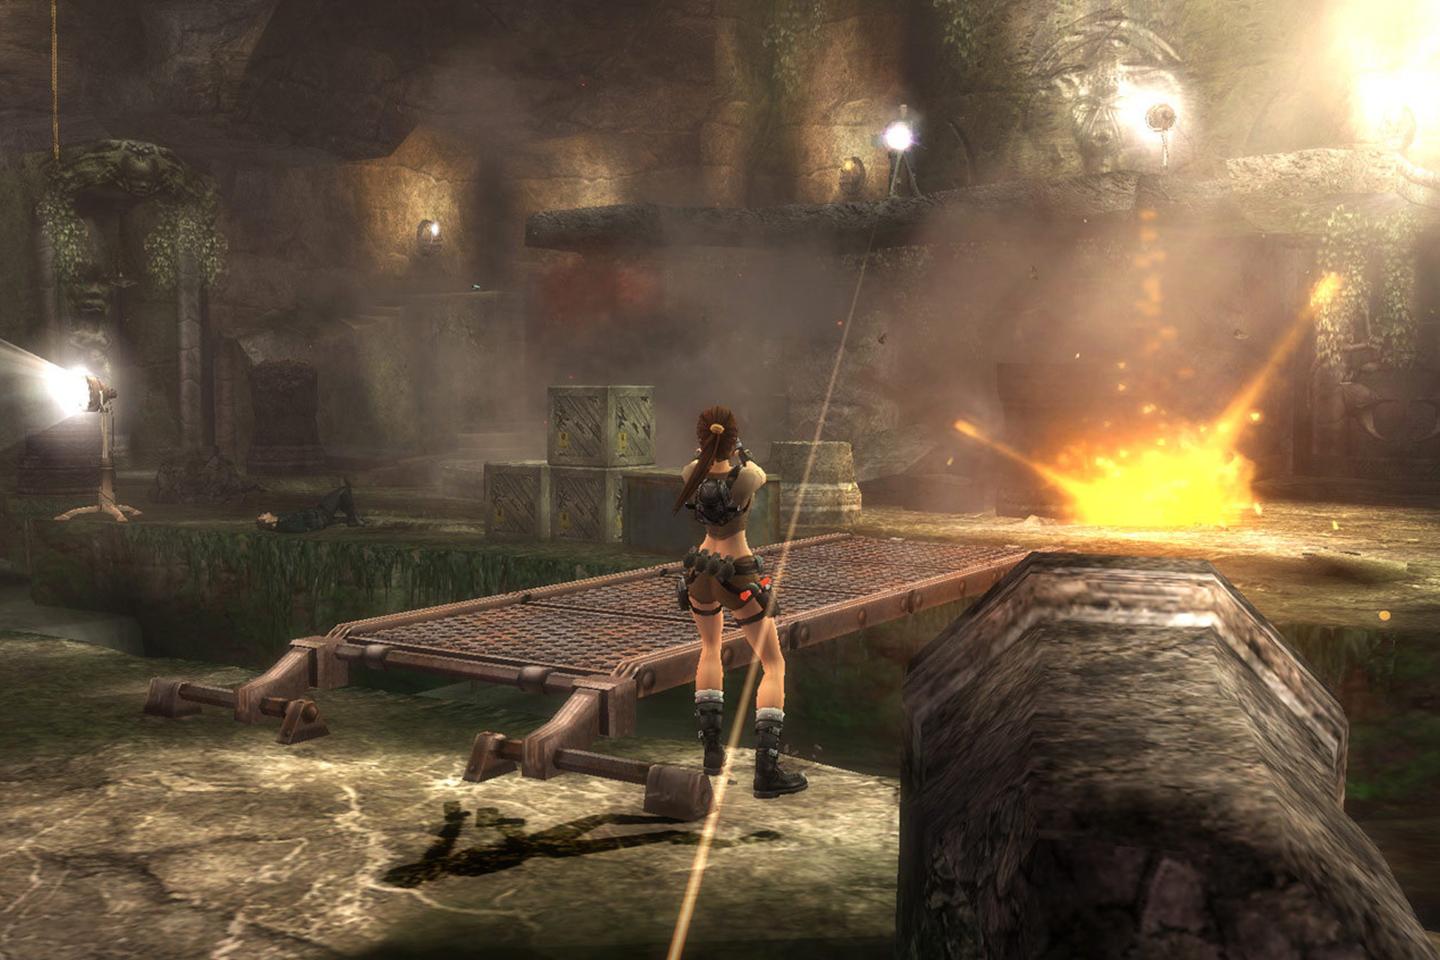 Lara facing bridge with small explosion happening on the other side.